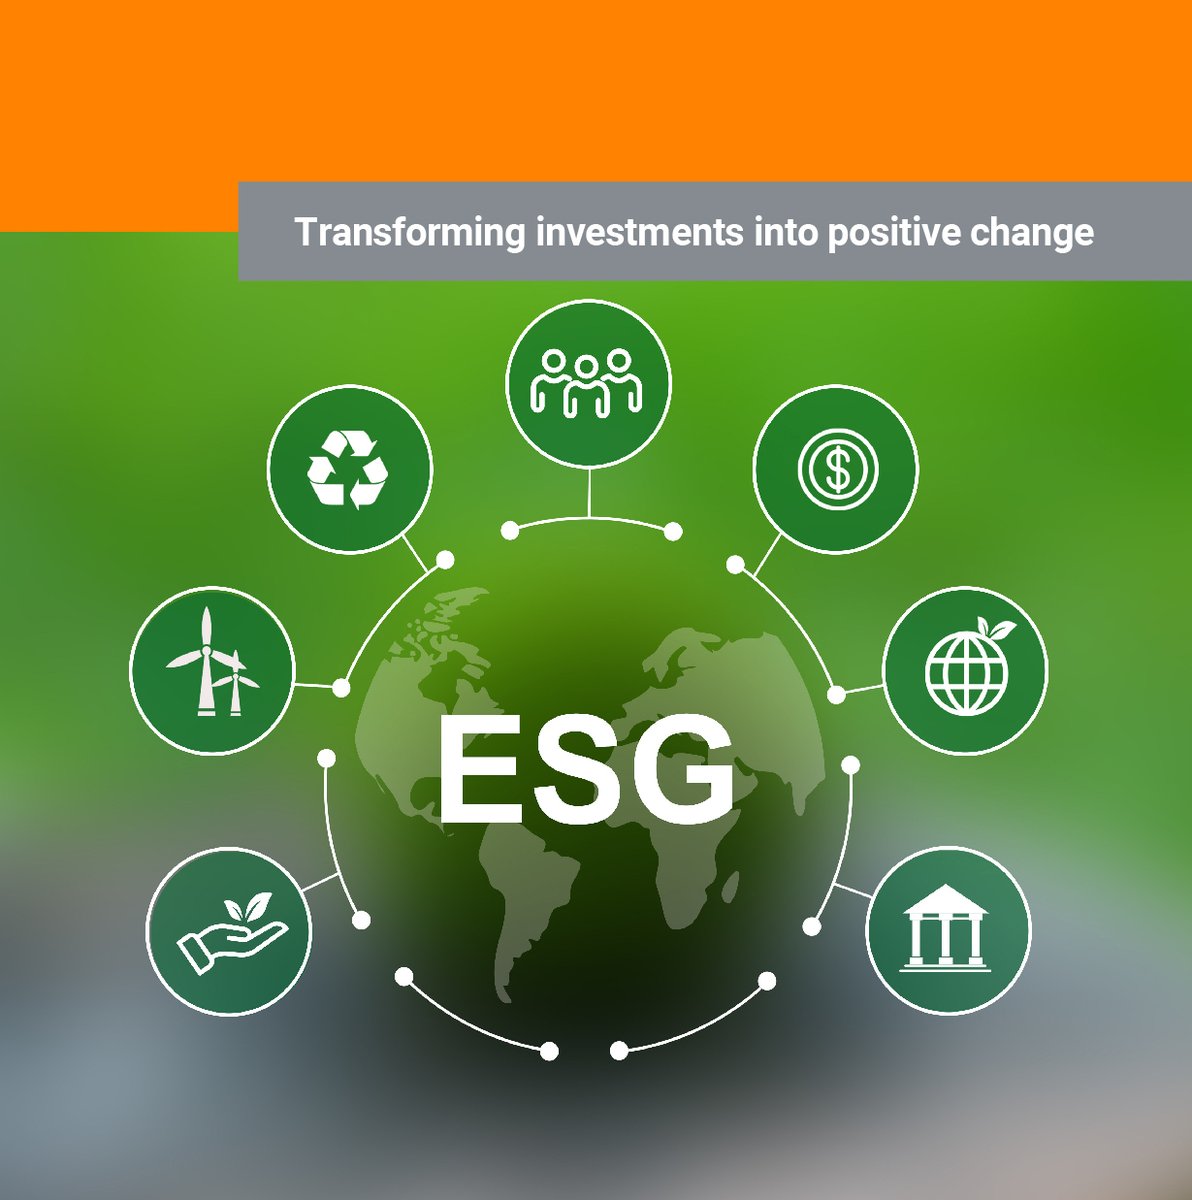 Our investments go beyond financial profitability; they must generate a positive impact on the environment and society. We are firmly committed to Environmental, Social, and Corporate Governance (ESG) conscious investments.

Our ESG investments are based on three pillars ⬇️